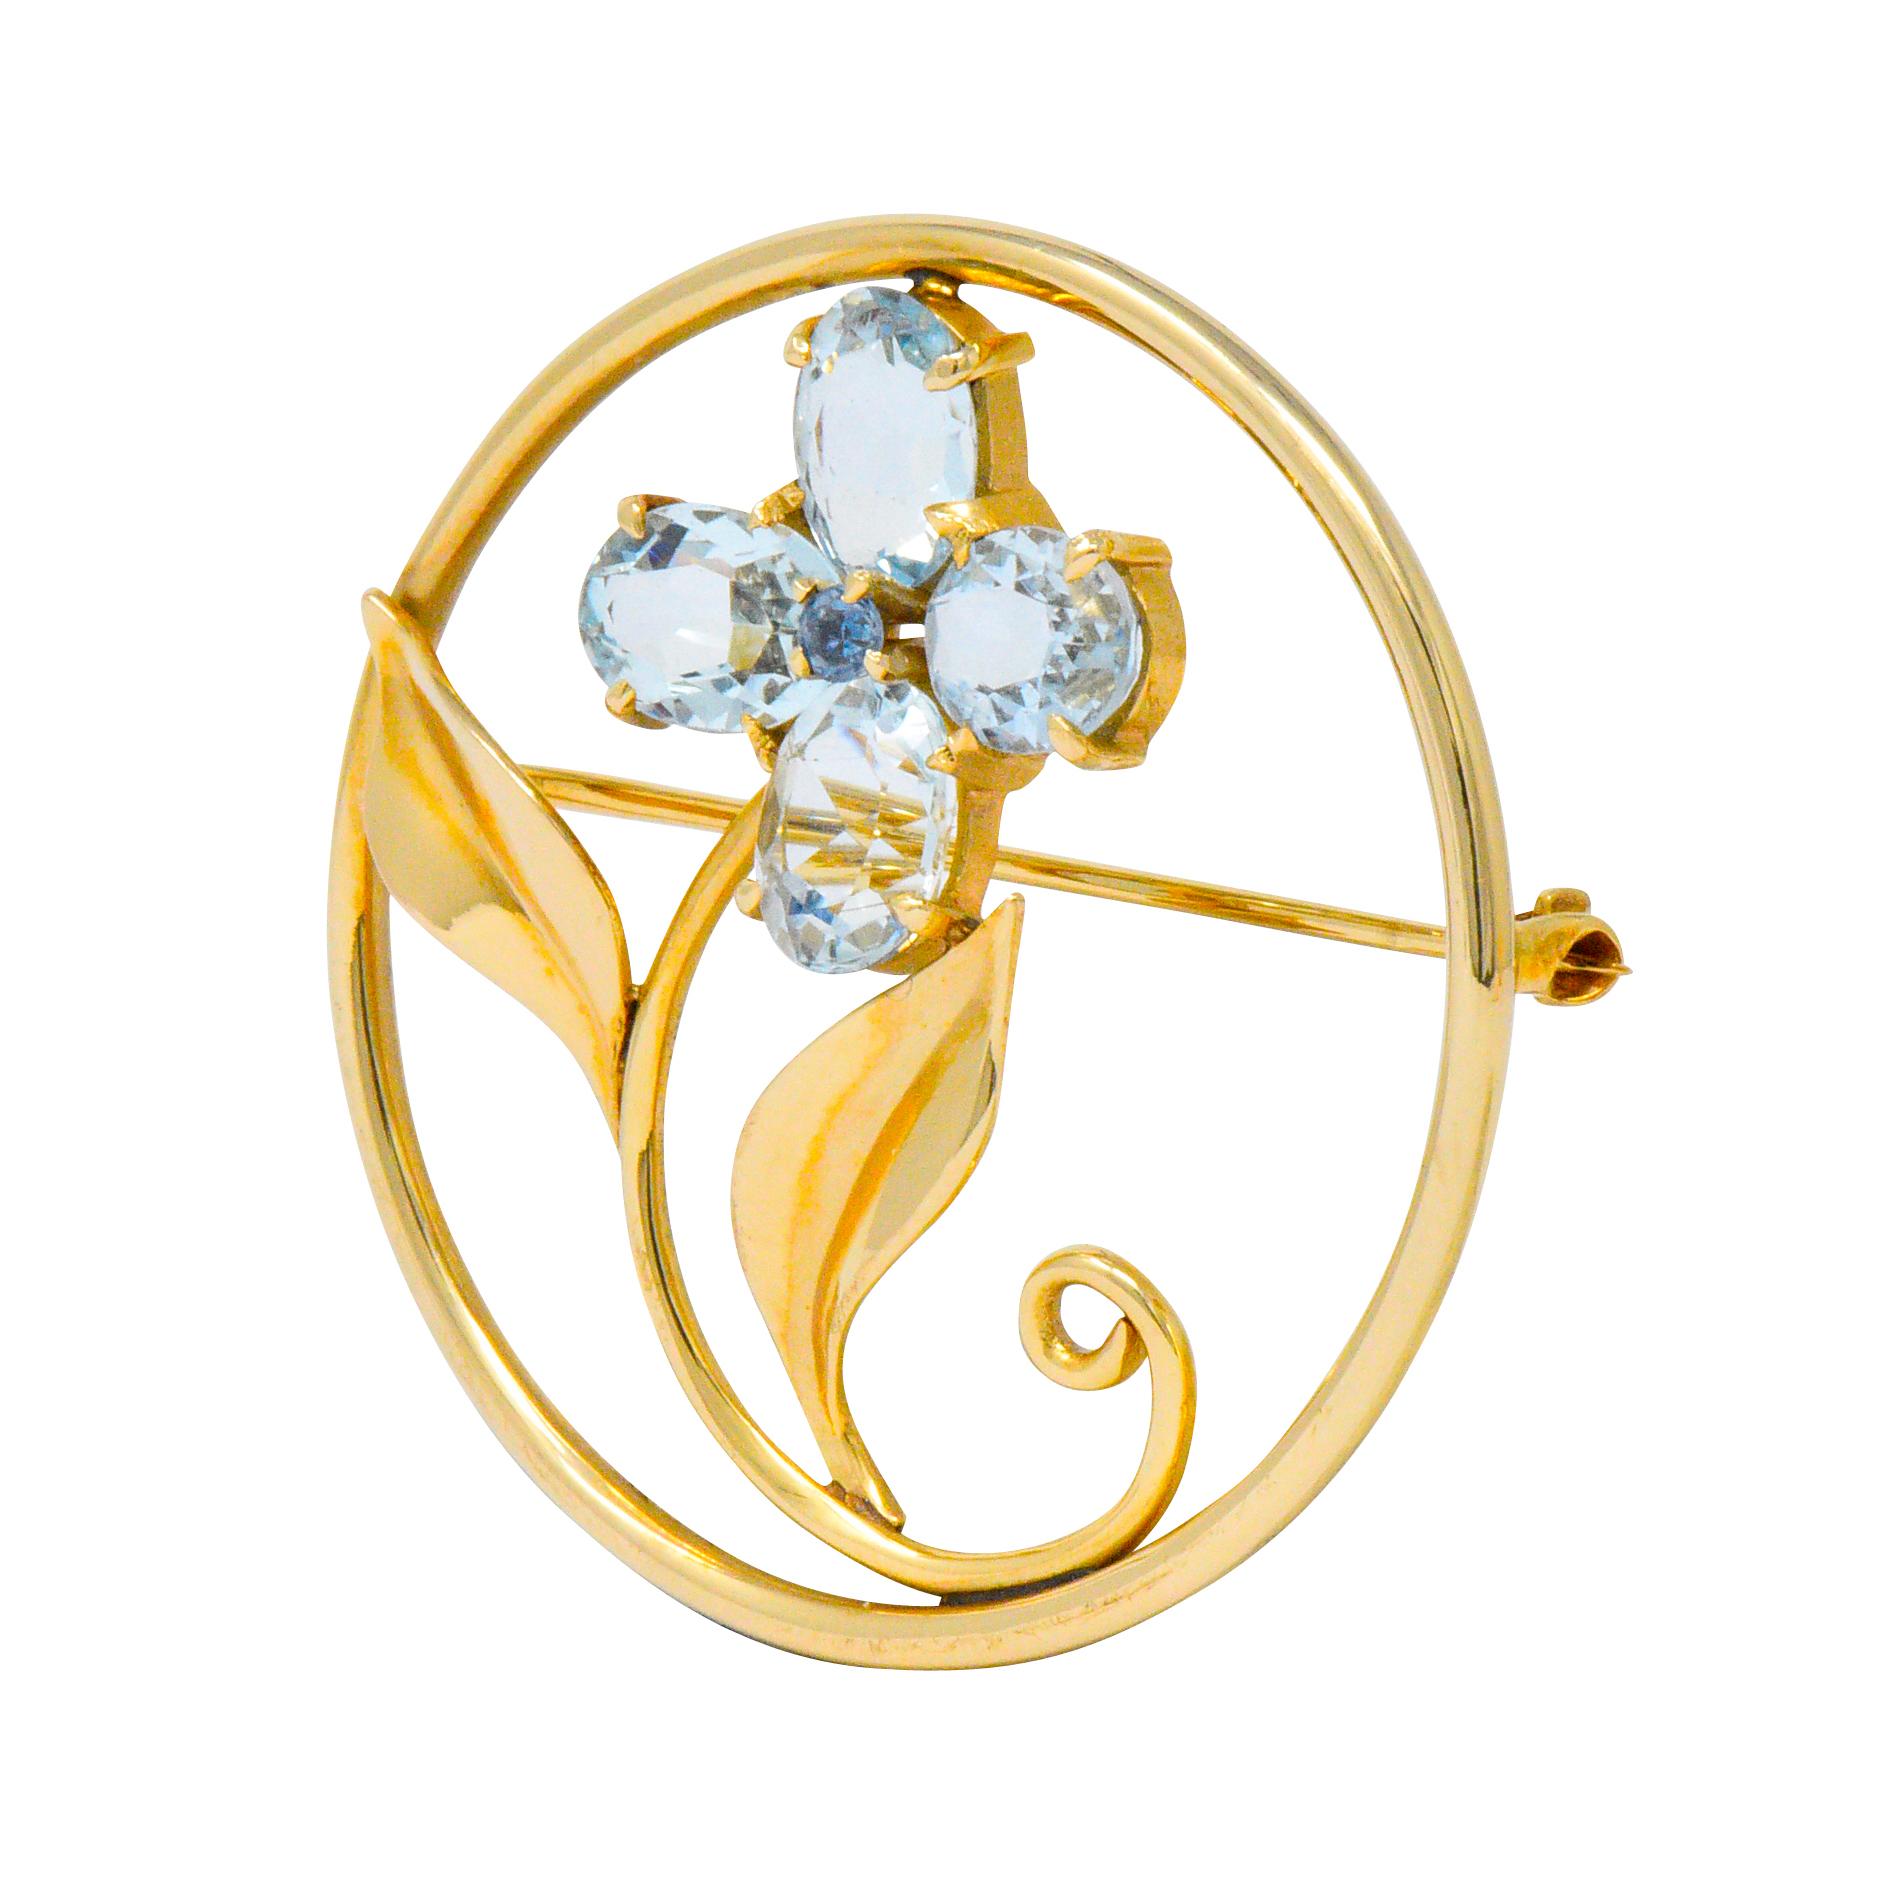 Designed as a circle style brooch centering a flower

Four oval cut aquamarine petals, weighing approximately 5.00 carats total, bright light blue and very well matched

Centering a round cut sapphire weighing approximately 0.15 carat, bright